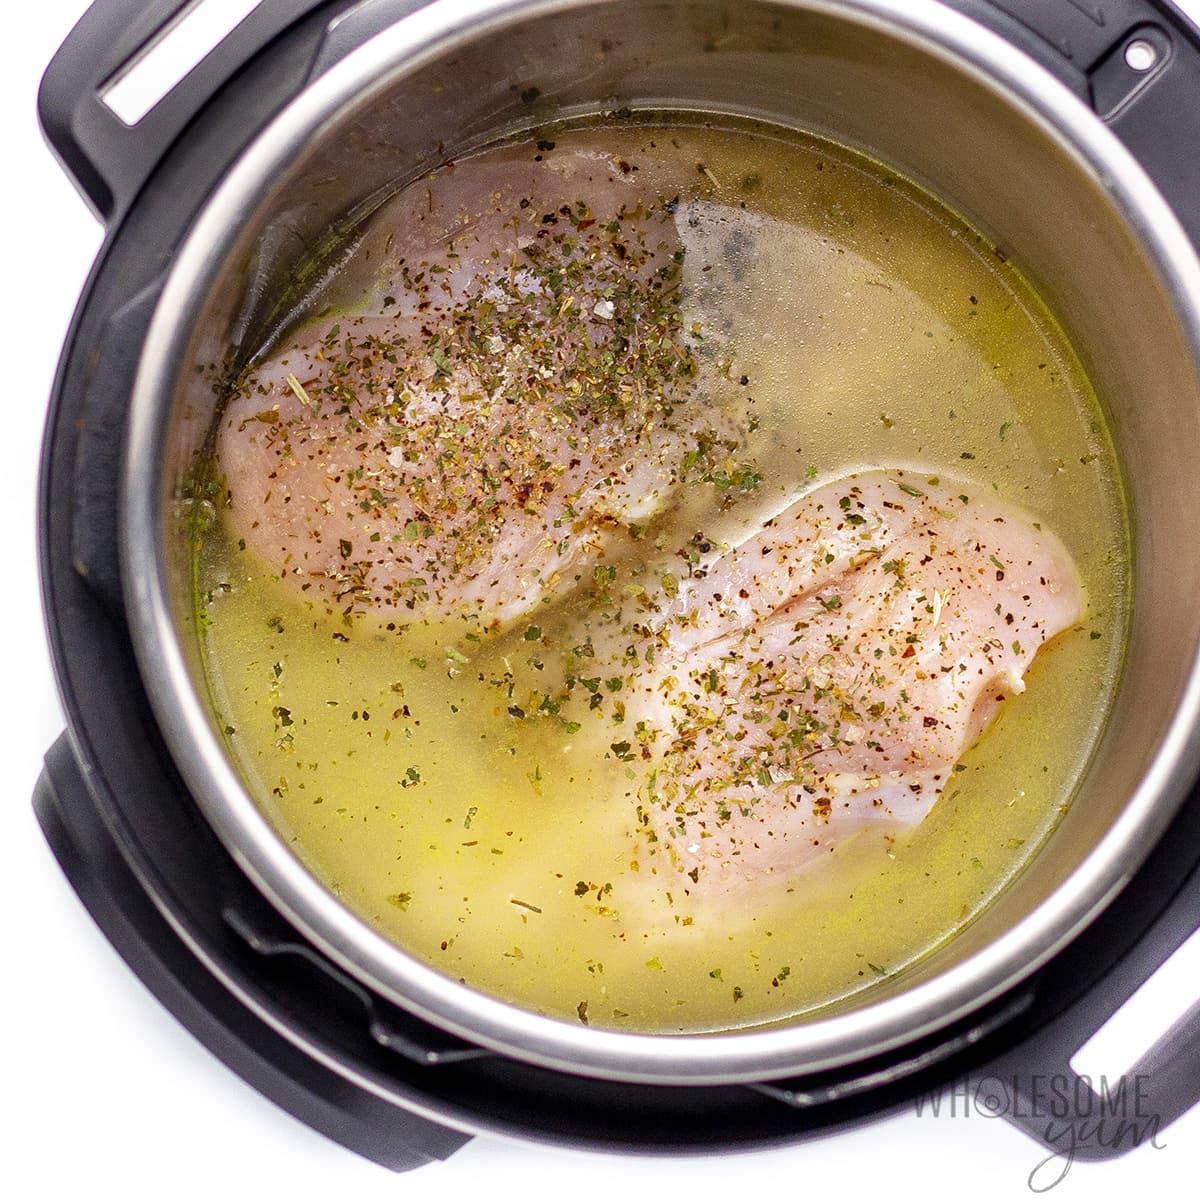 Raw chicken breasts in the Instant Pot.